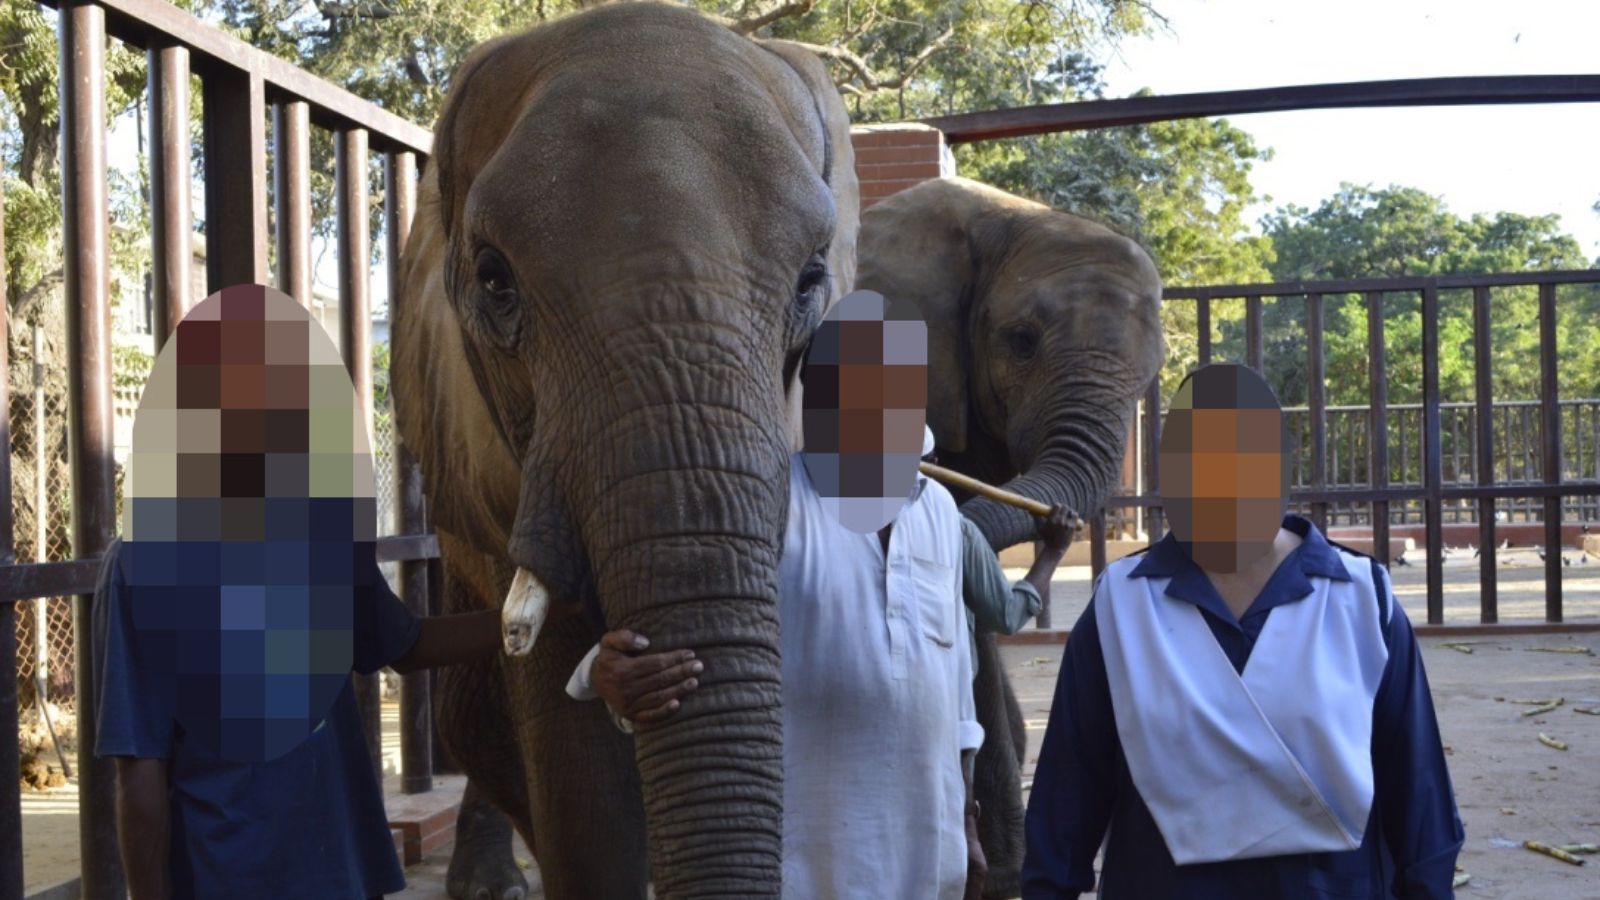 The elephant Noor Jehan at Karachi Zoo with people stood either side with blurred out faces